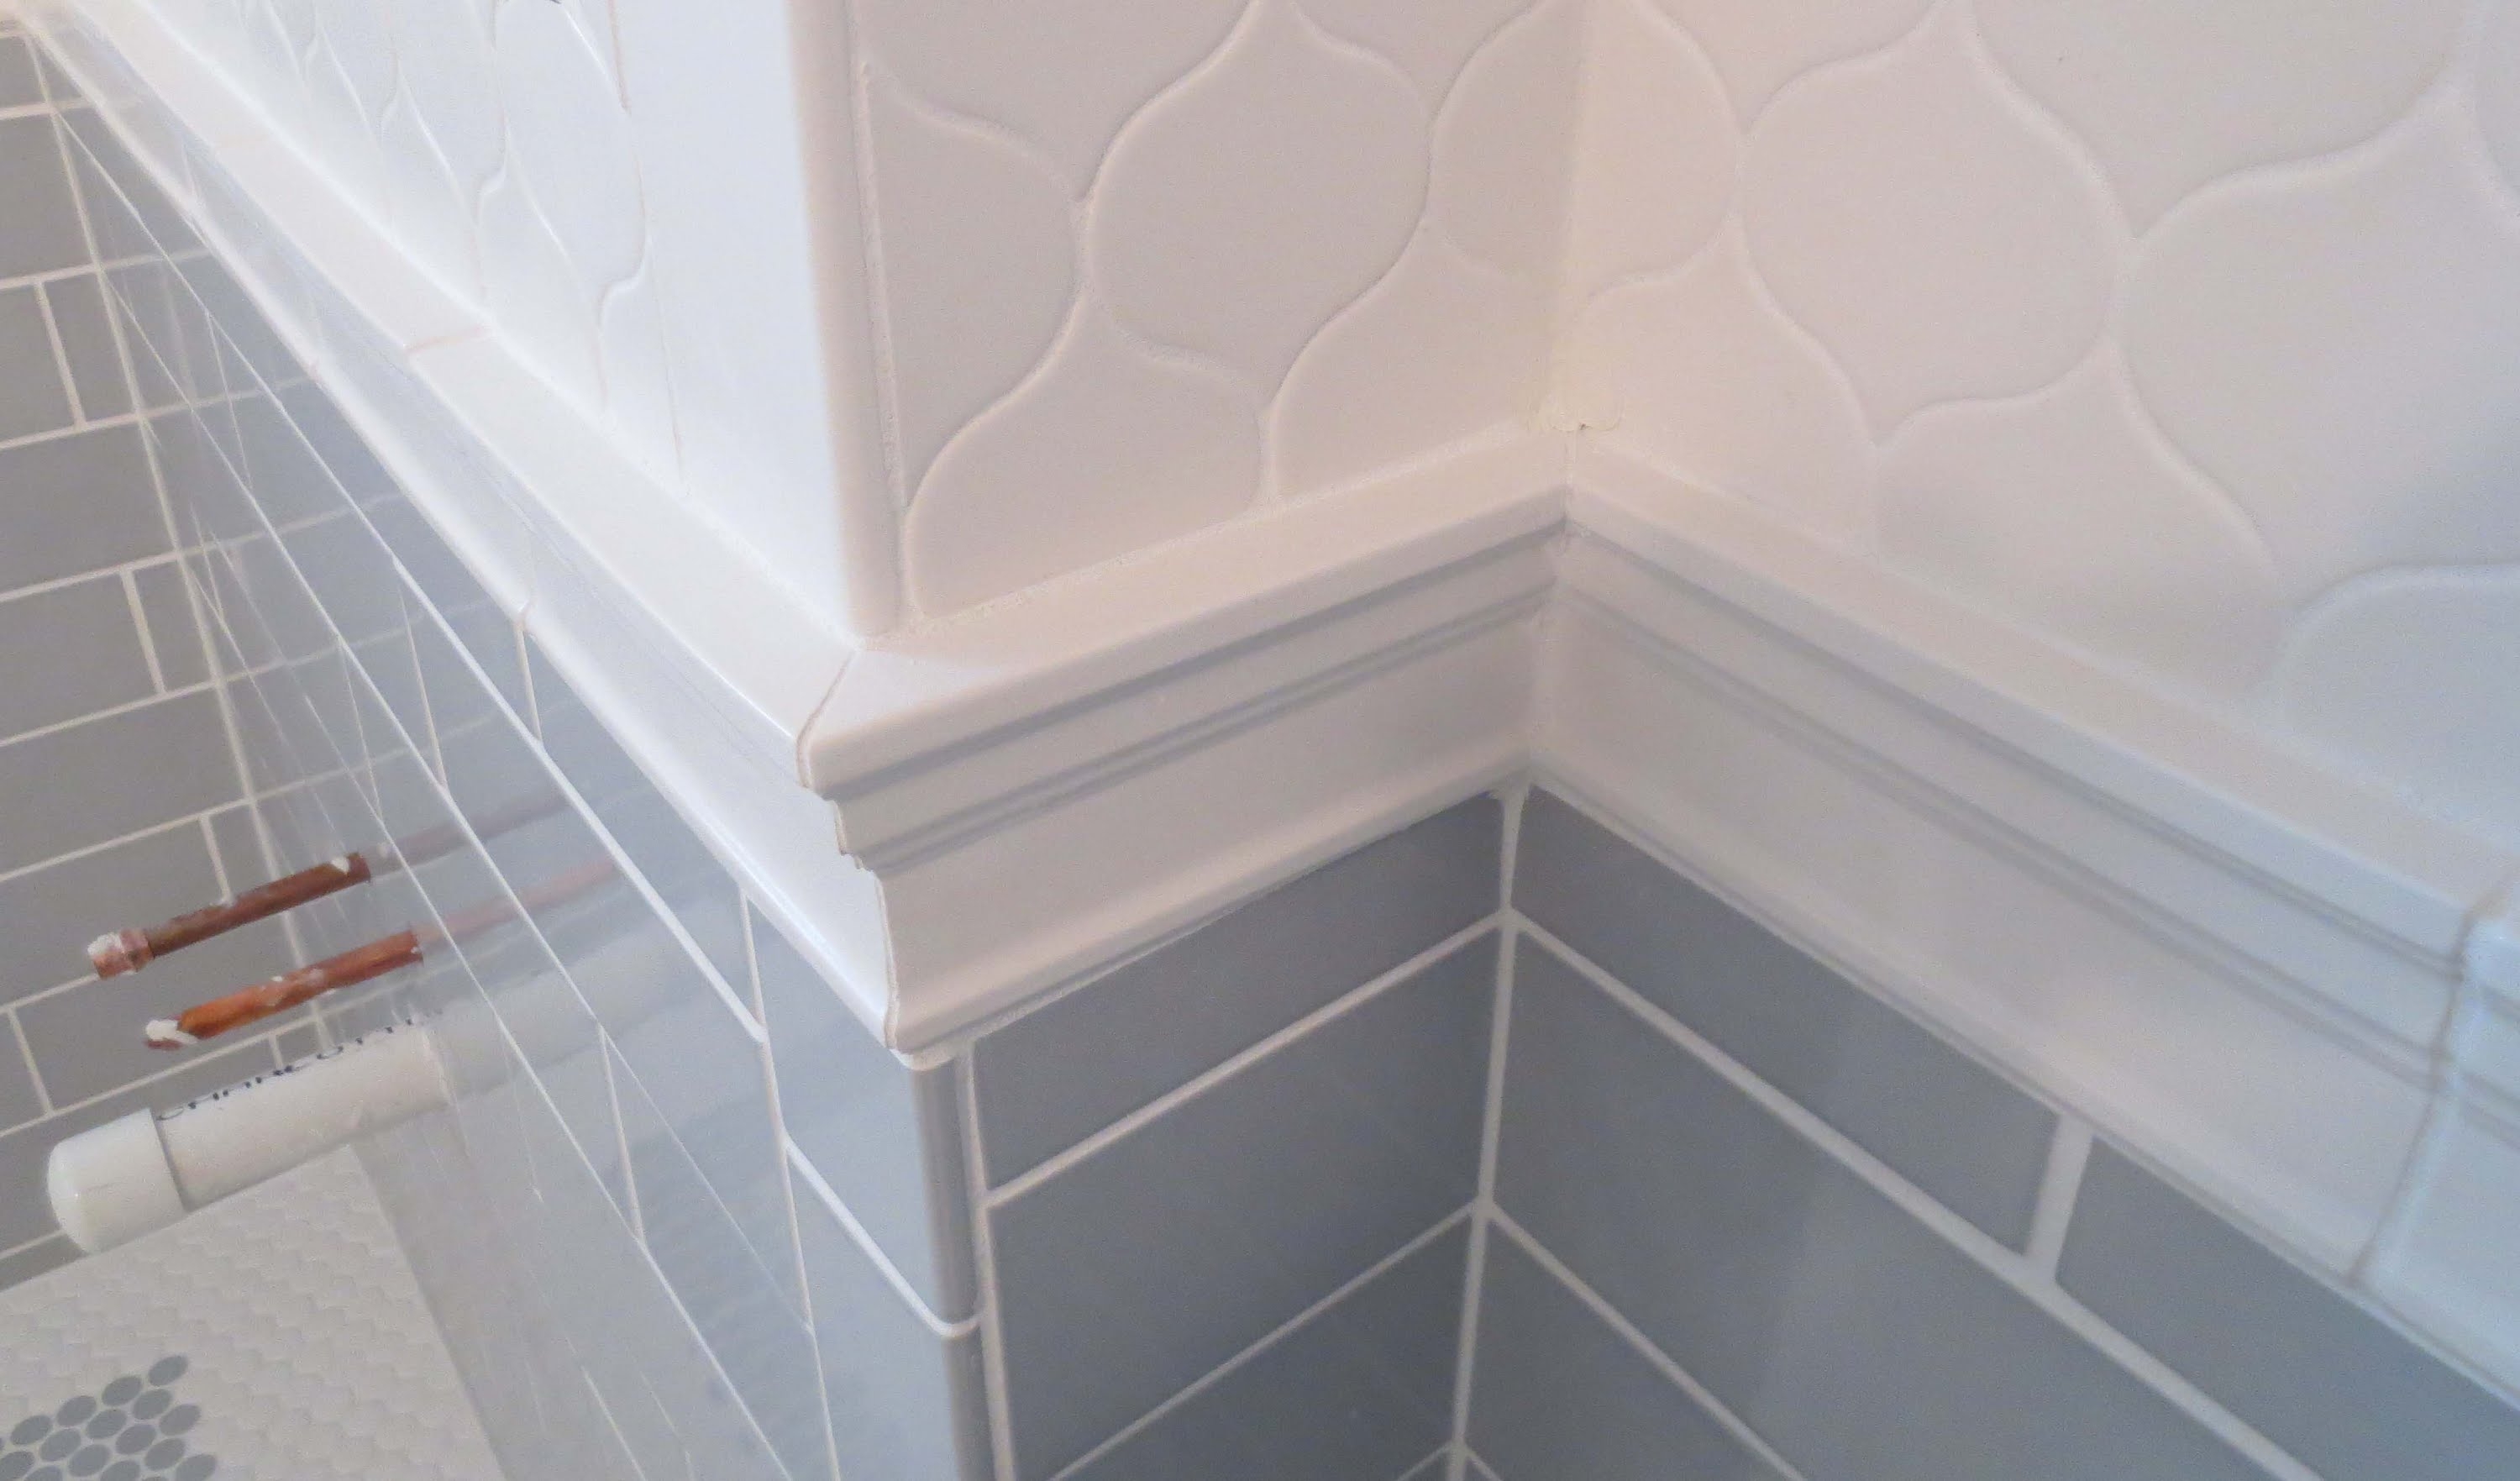 Floor To Ceiling Tiles And Cornice